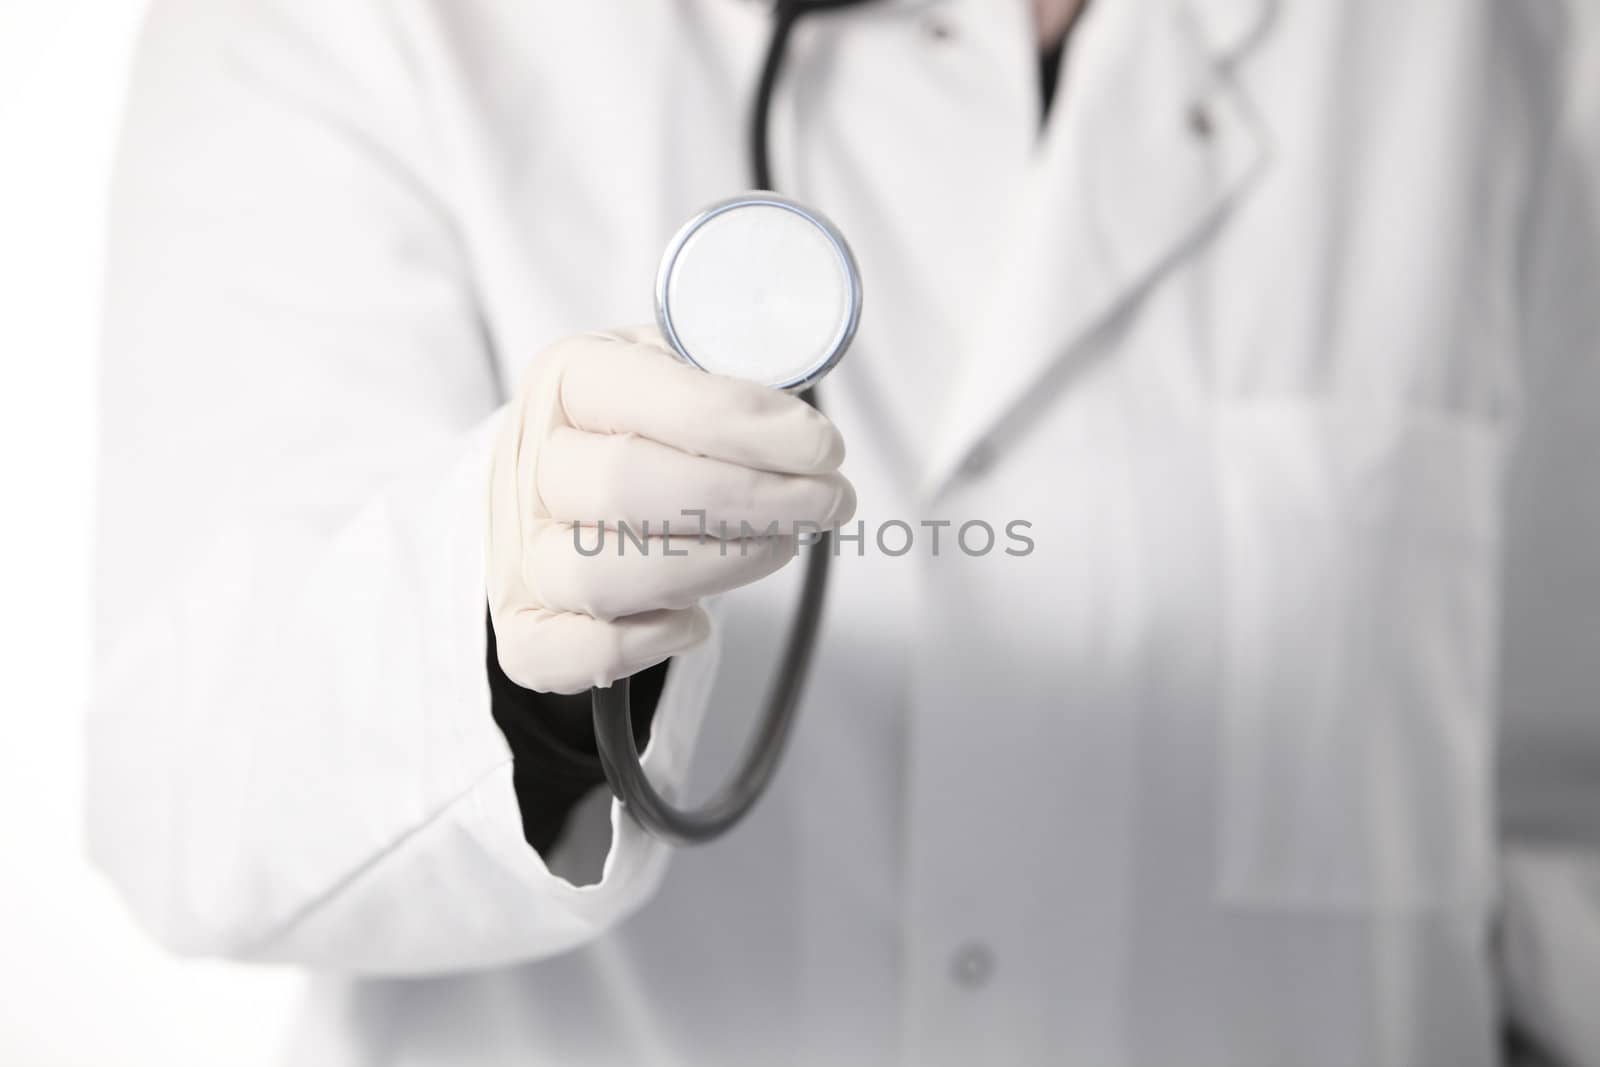 Cropped view of the gloved hand of a doctor in a labcoat holding a stethoscope with the disc pointing towards the camera